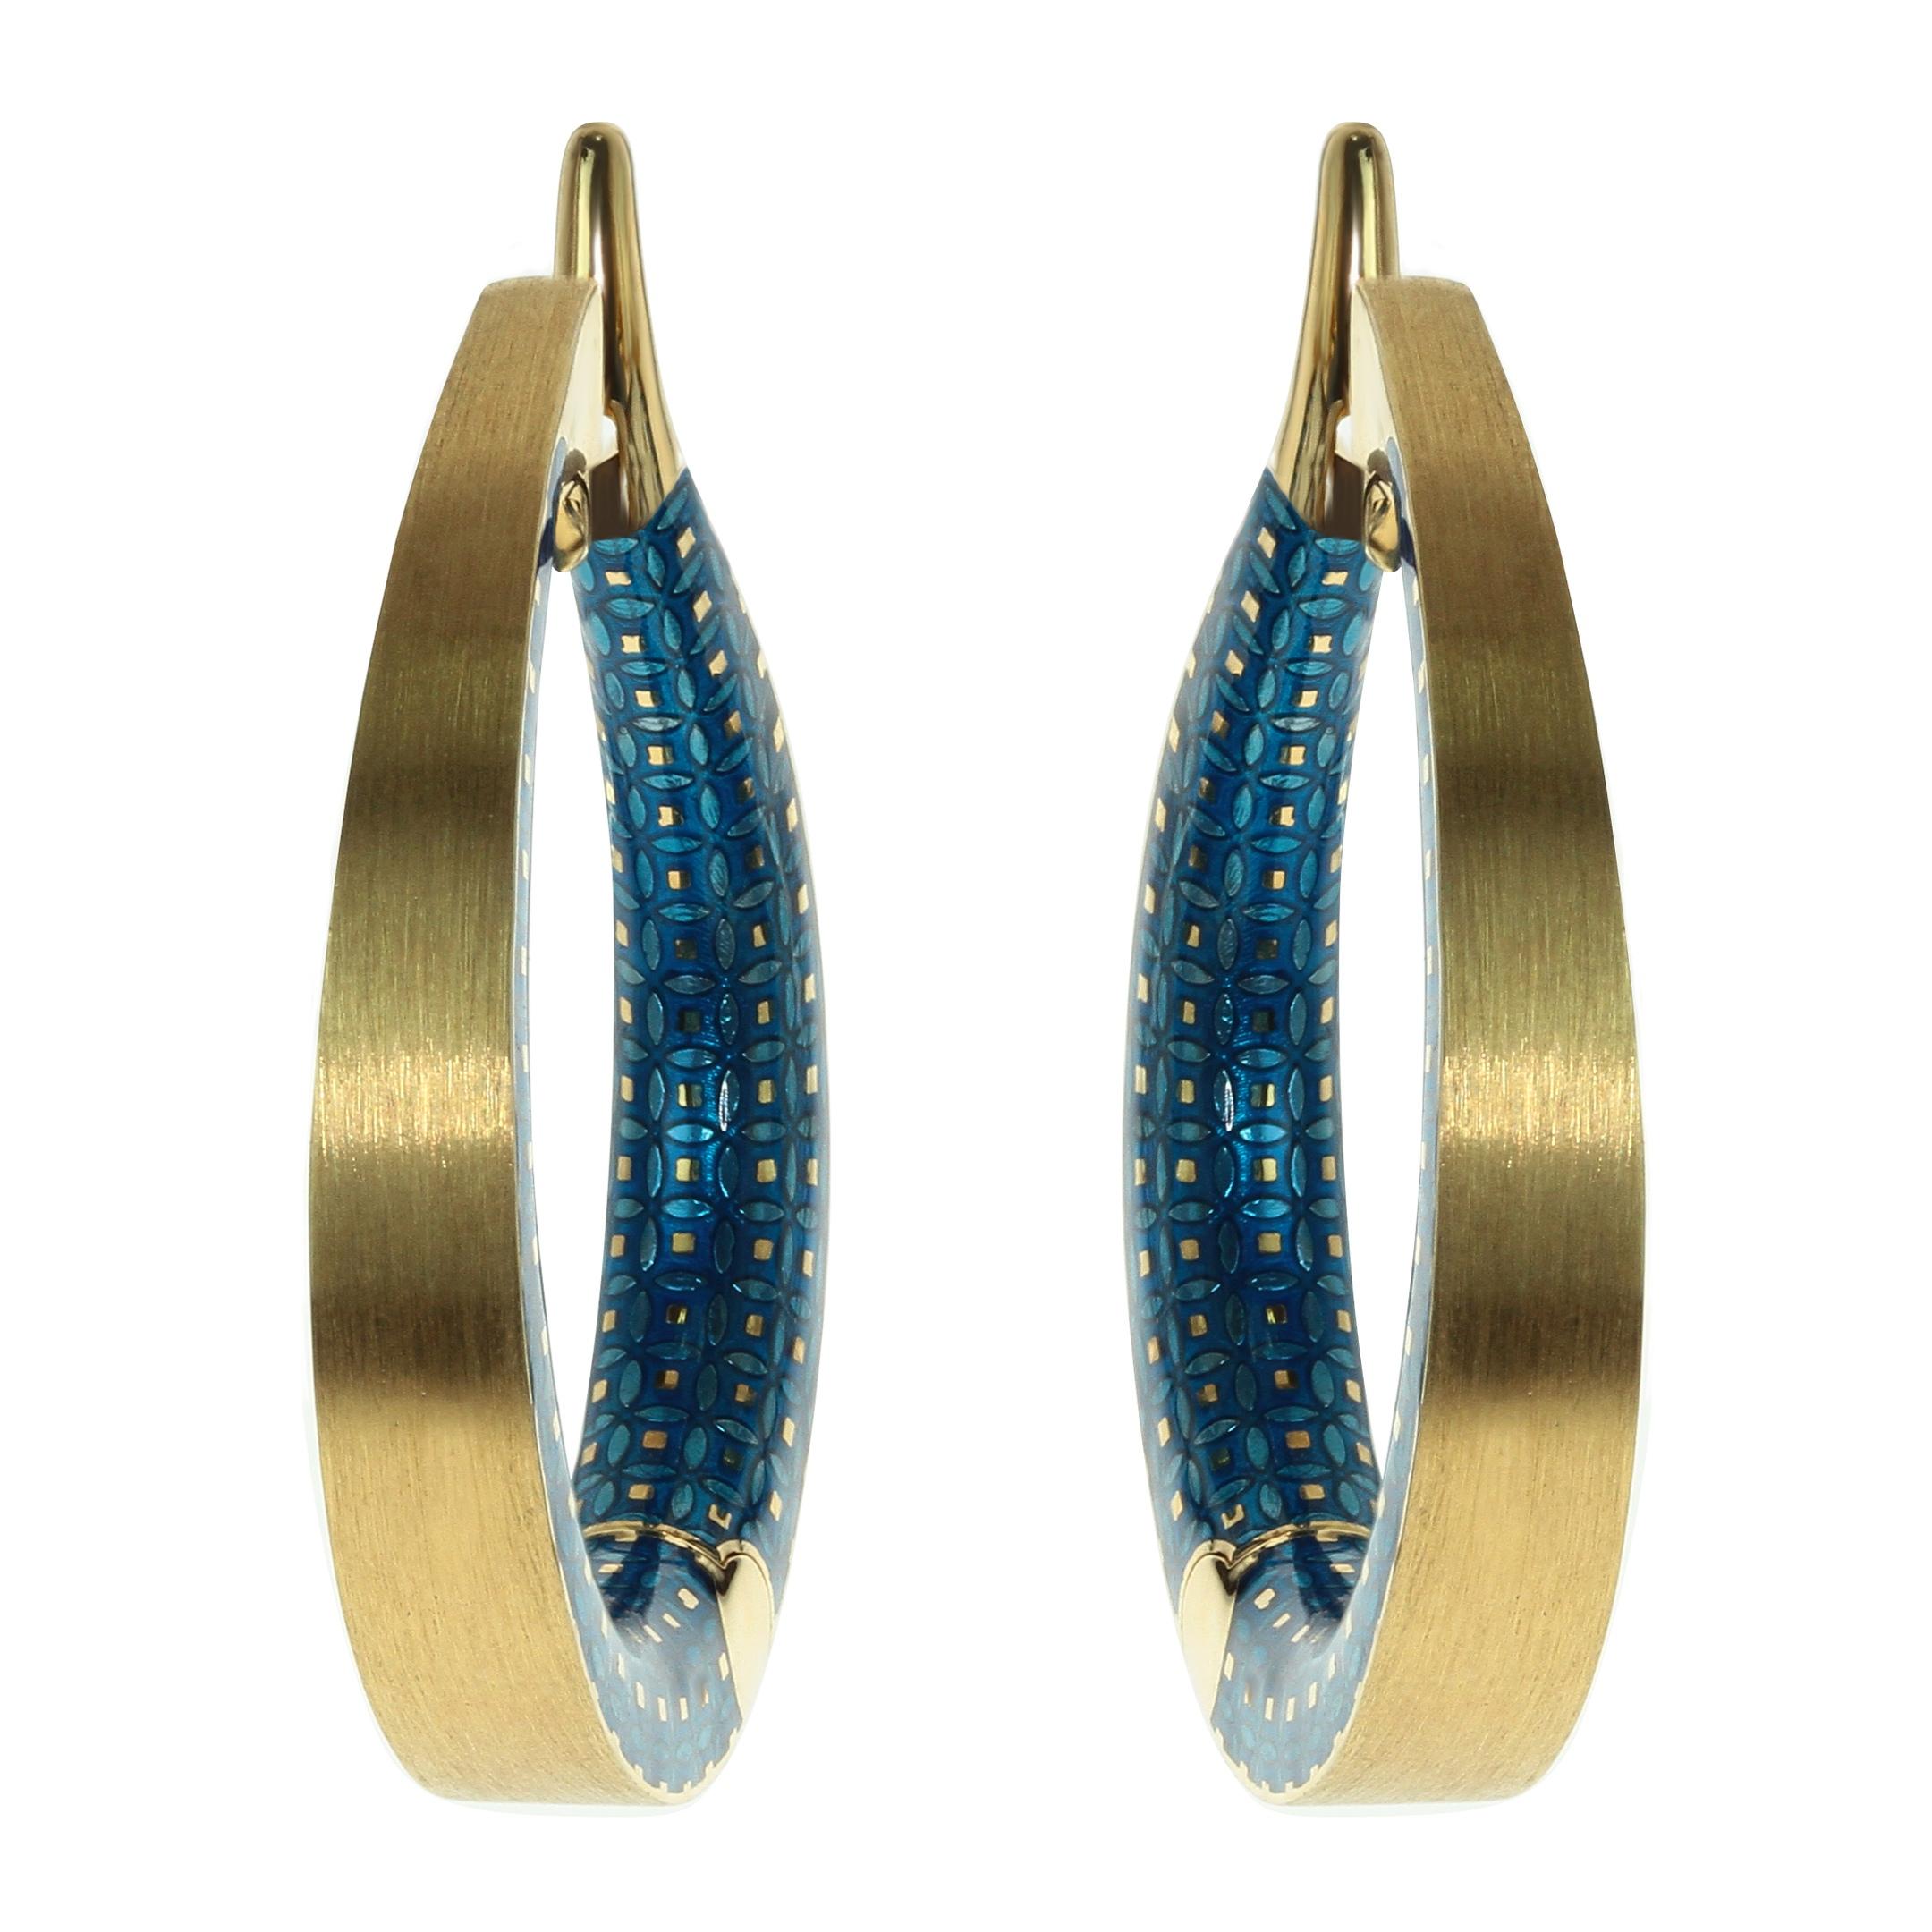 Colored Enamel 18 Karat Yellow Gold Kaleidoscope Hoop Earrings

Please take a look at one of our trademark texture in Kaleidoscope Collection - 